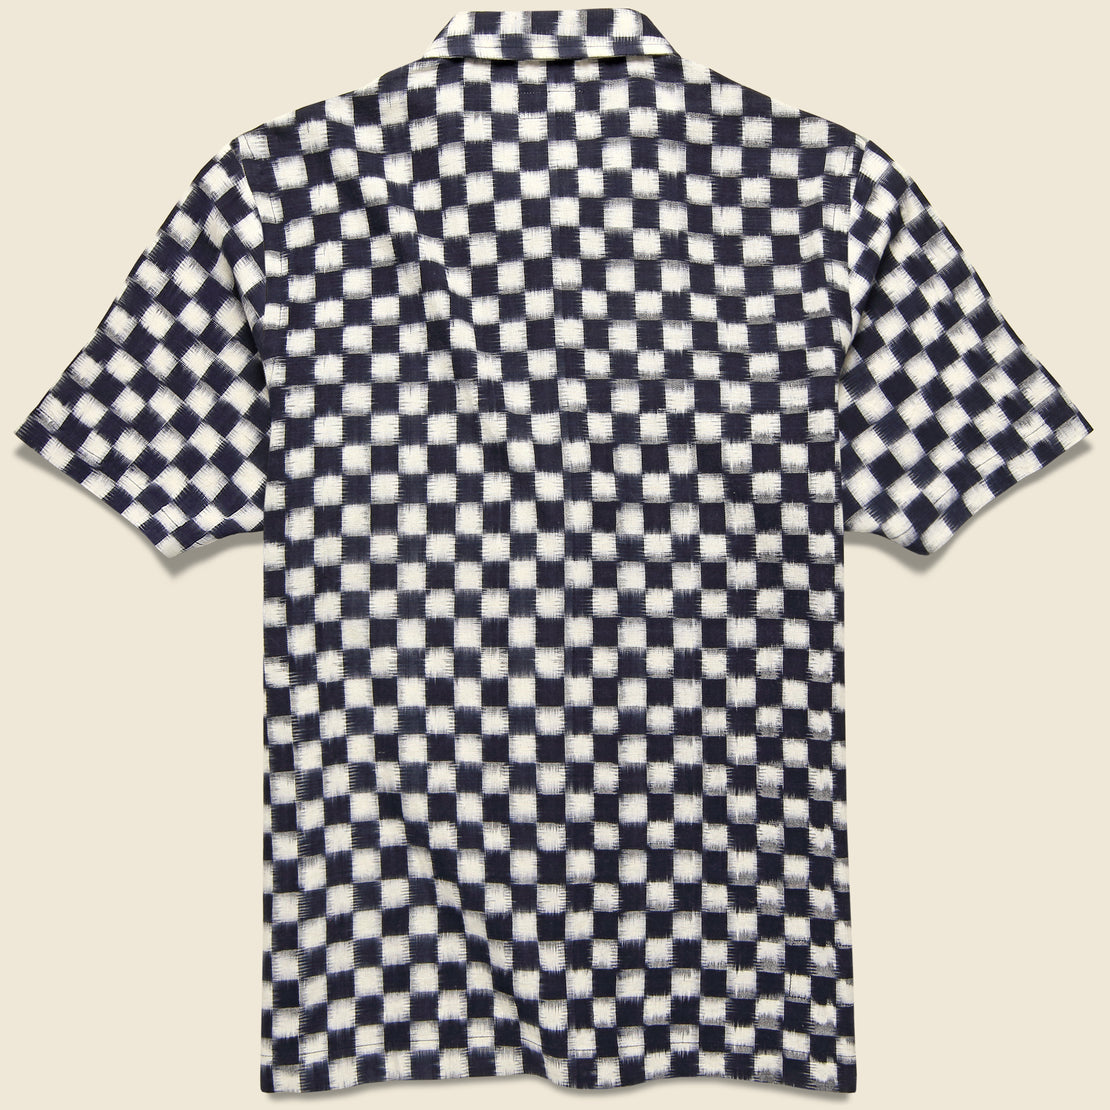 Double Ikat Chequerboard Road Shirt - Indigo/White - Universal Works - STAG Provisions - Tops - S/S Woven - Other Pattern